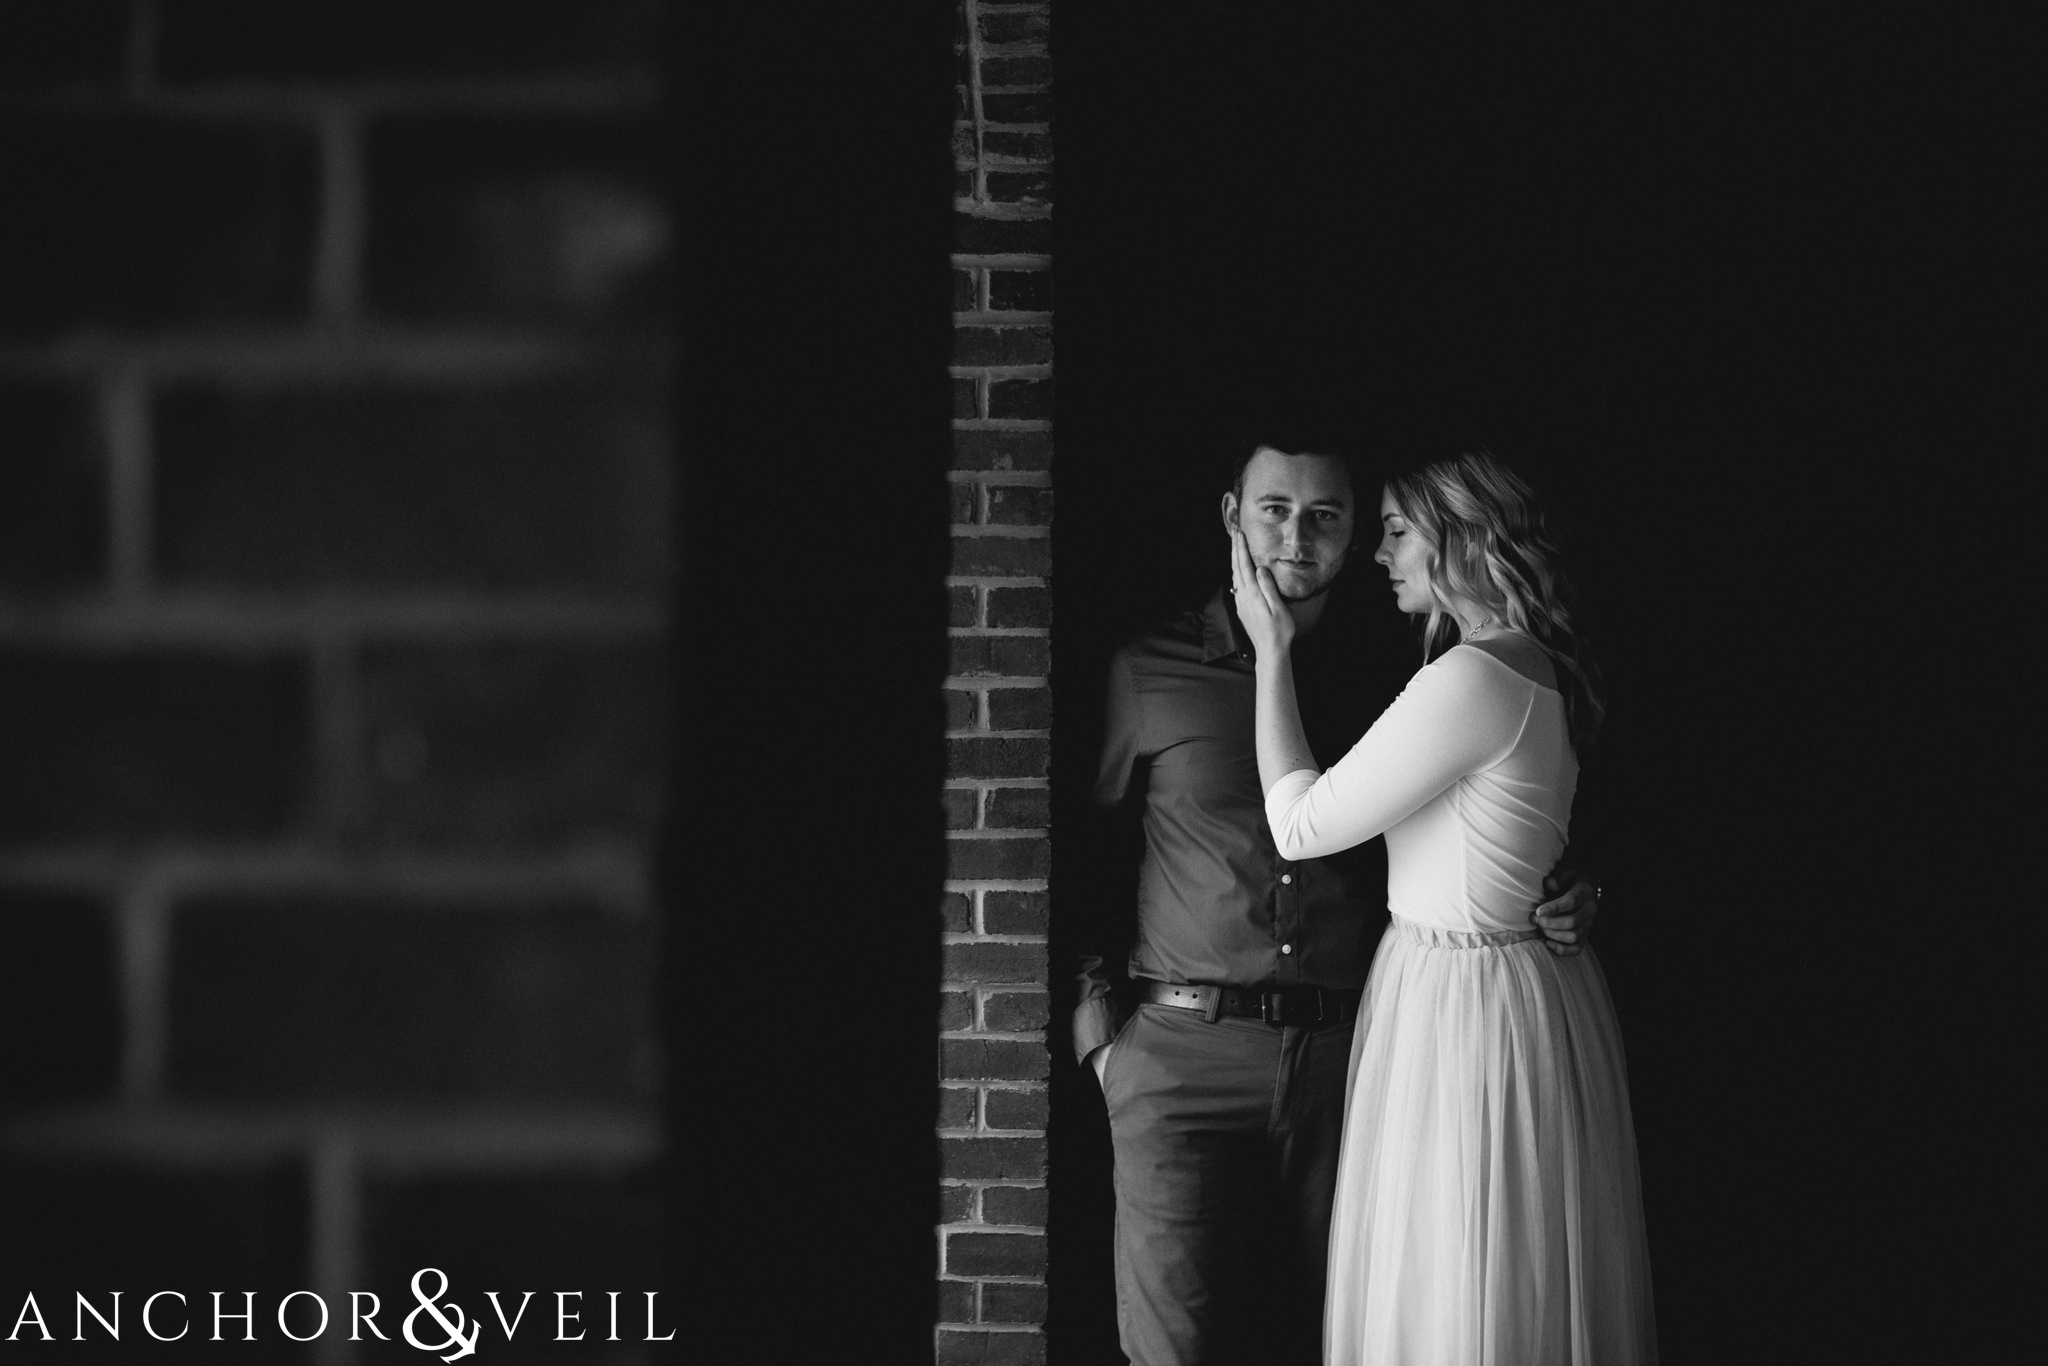 in the shadows during their Disney world engagement session at the Boardwalk Hotel Inn